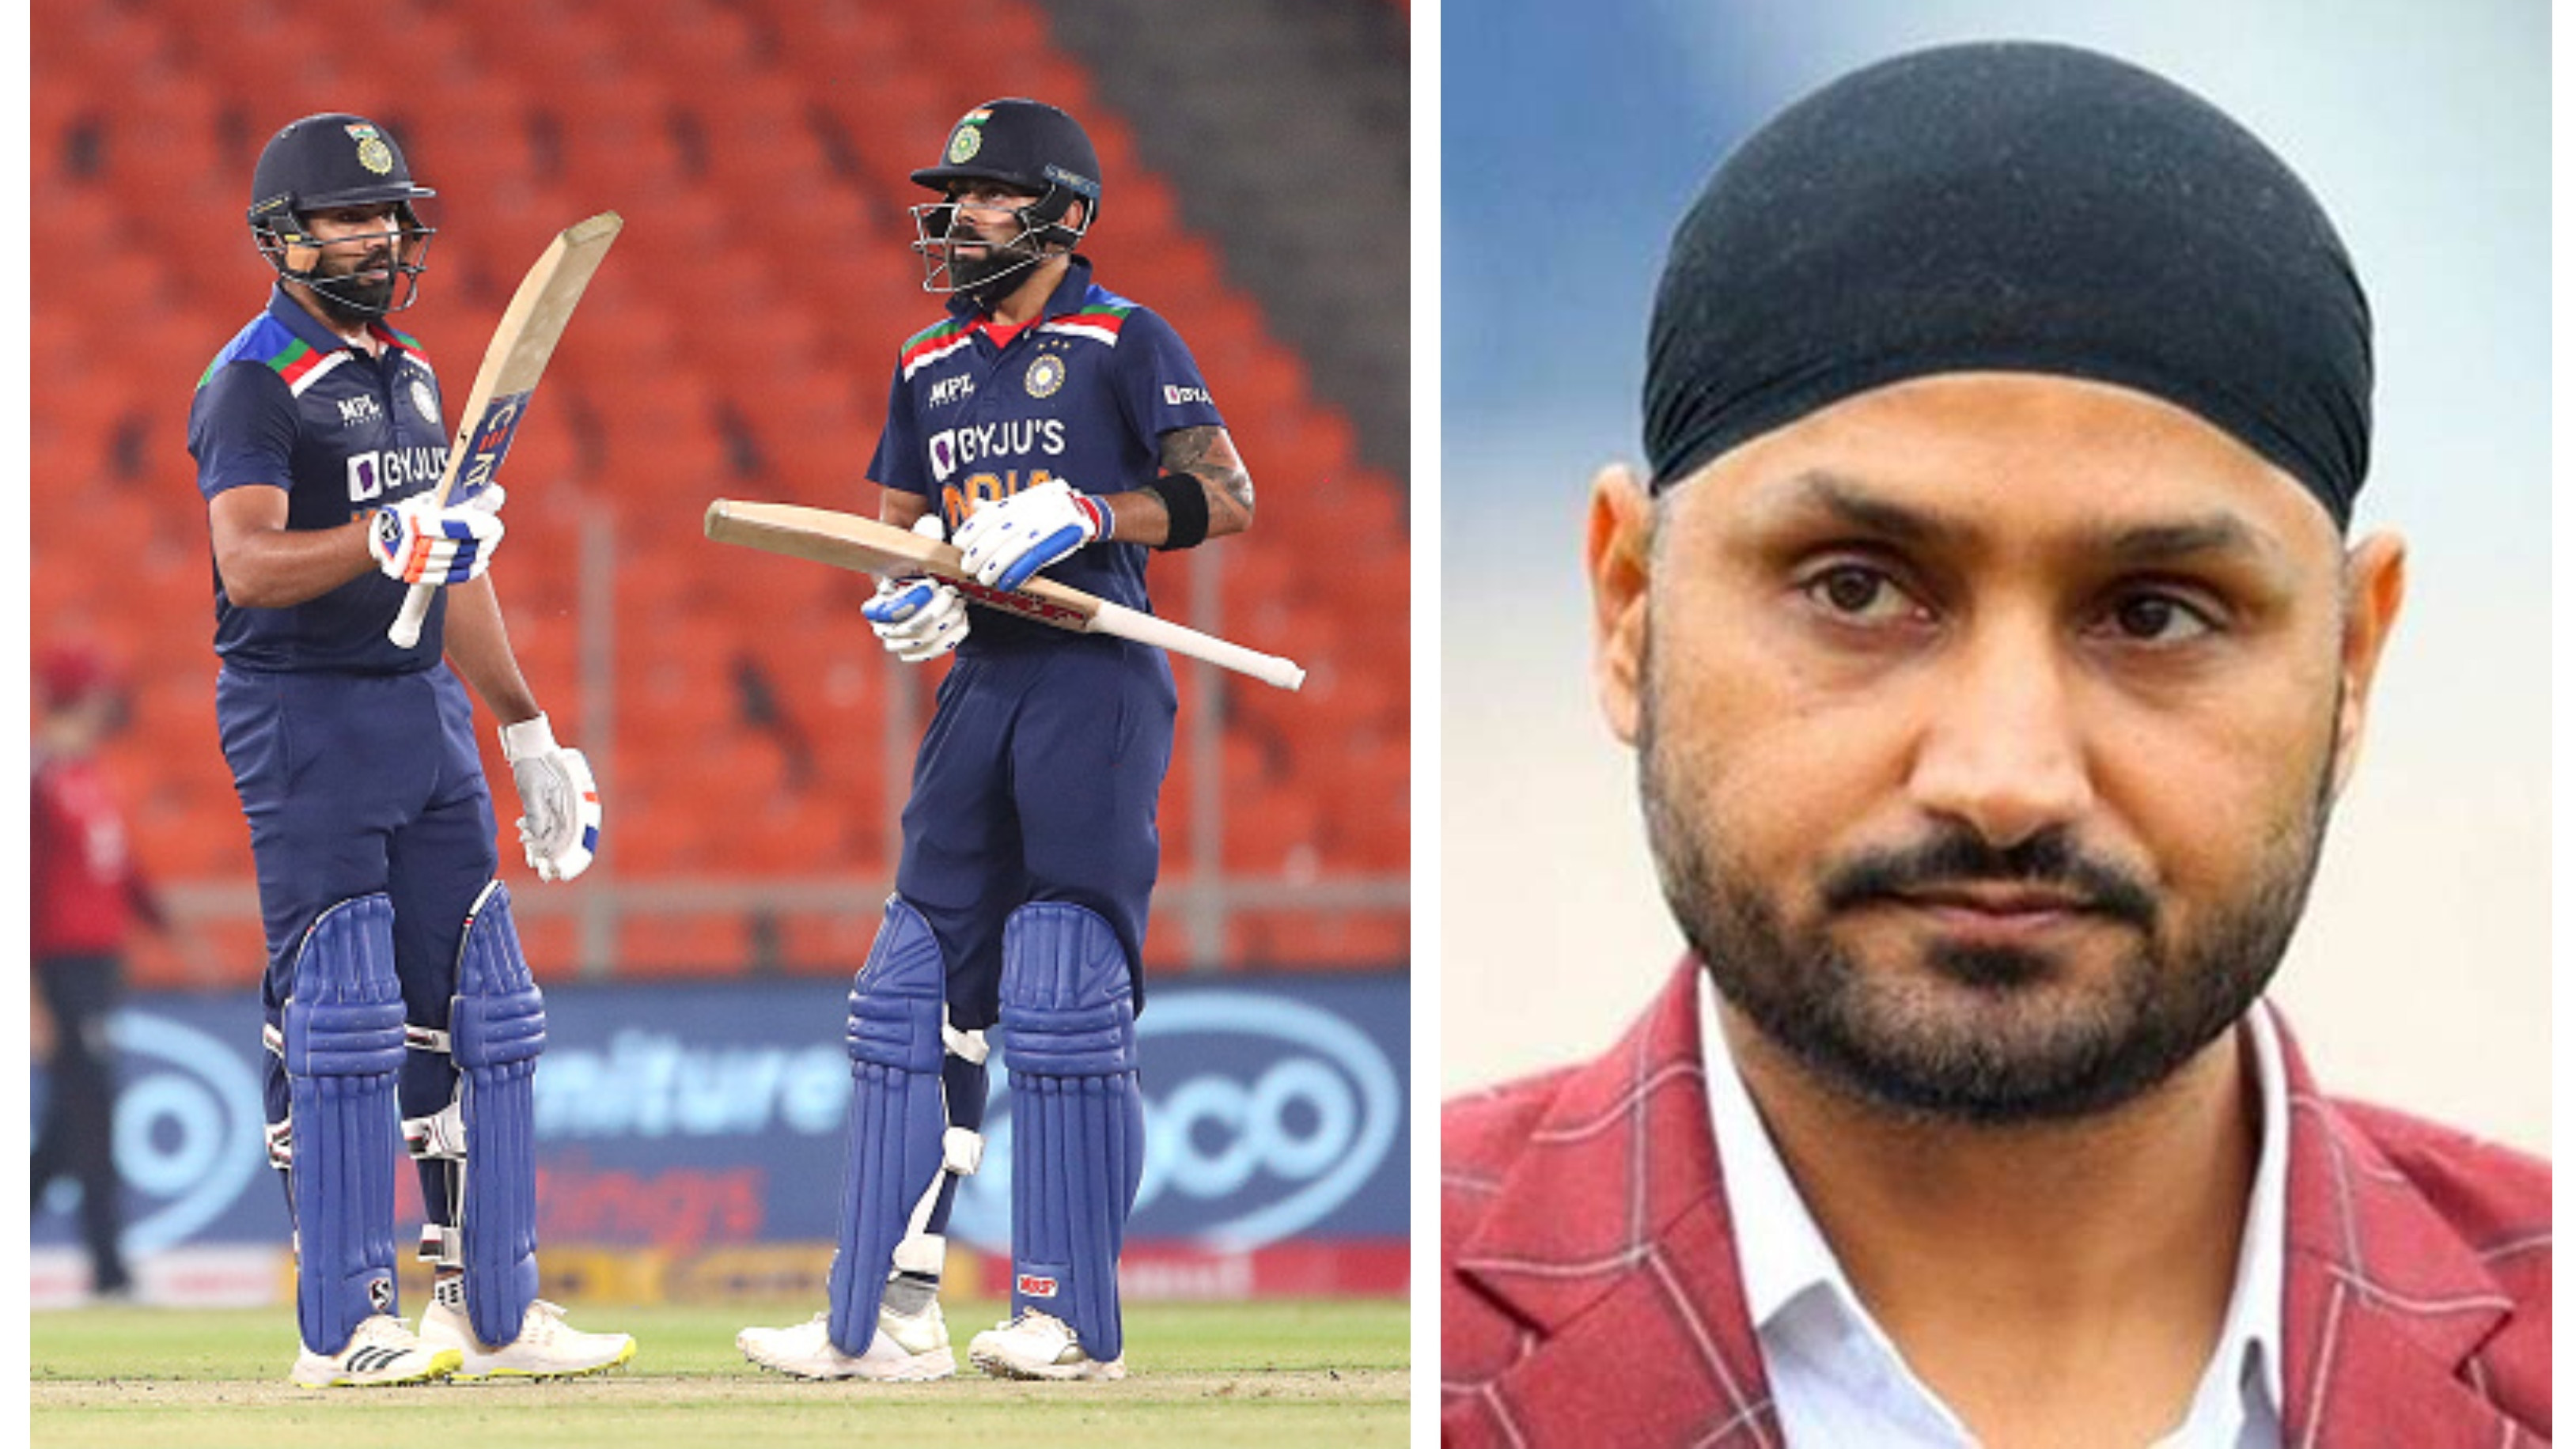 Harbhajan Singh endorses BCCI’s decision to appoint Rohit Sharma as white-ball captain